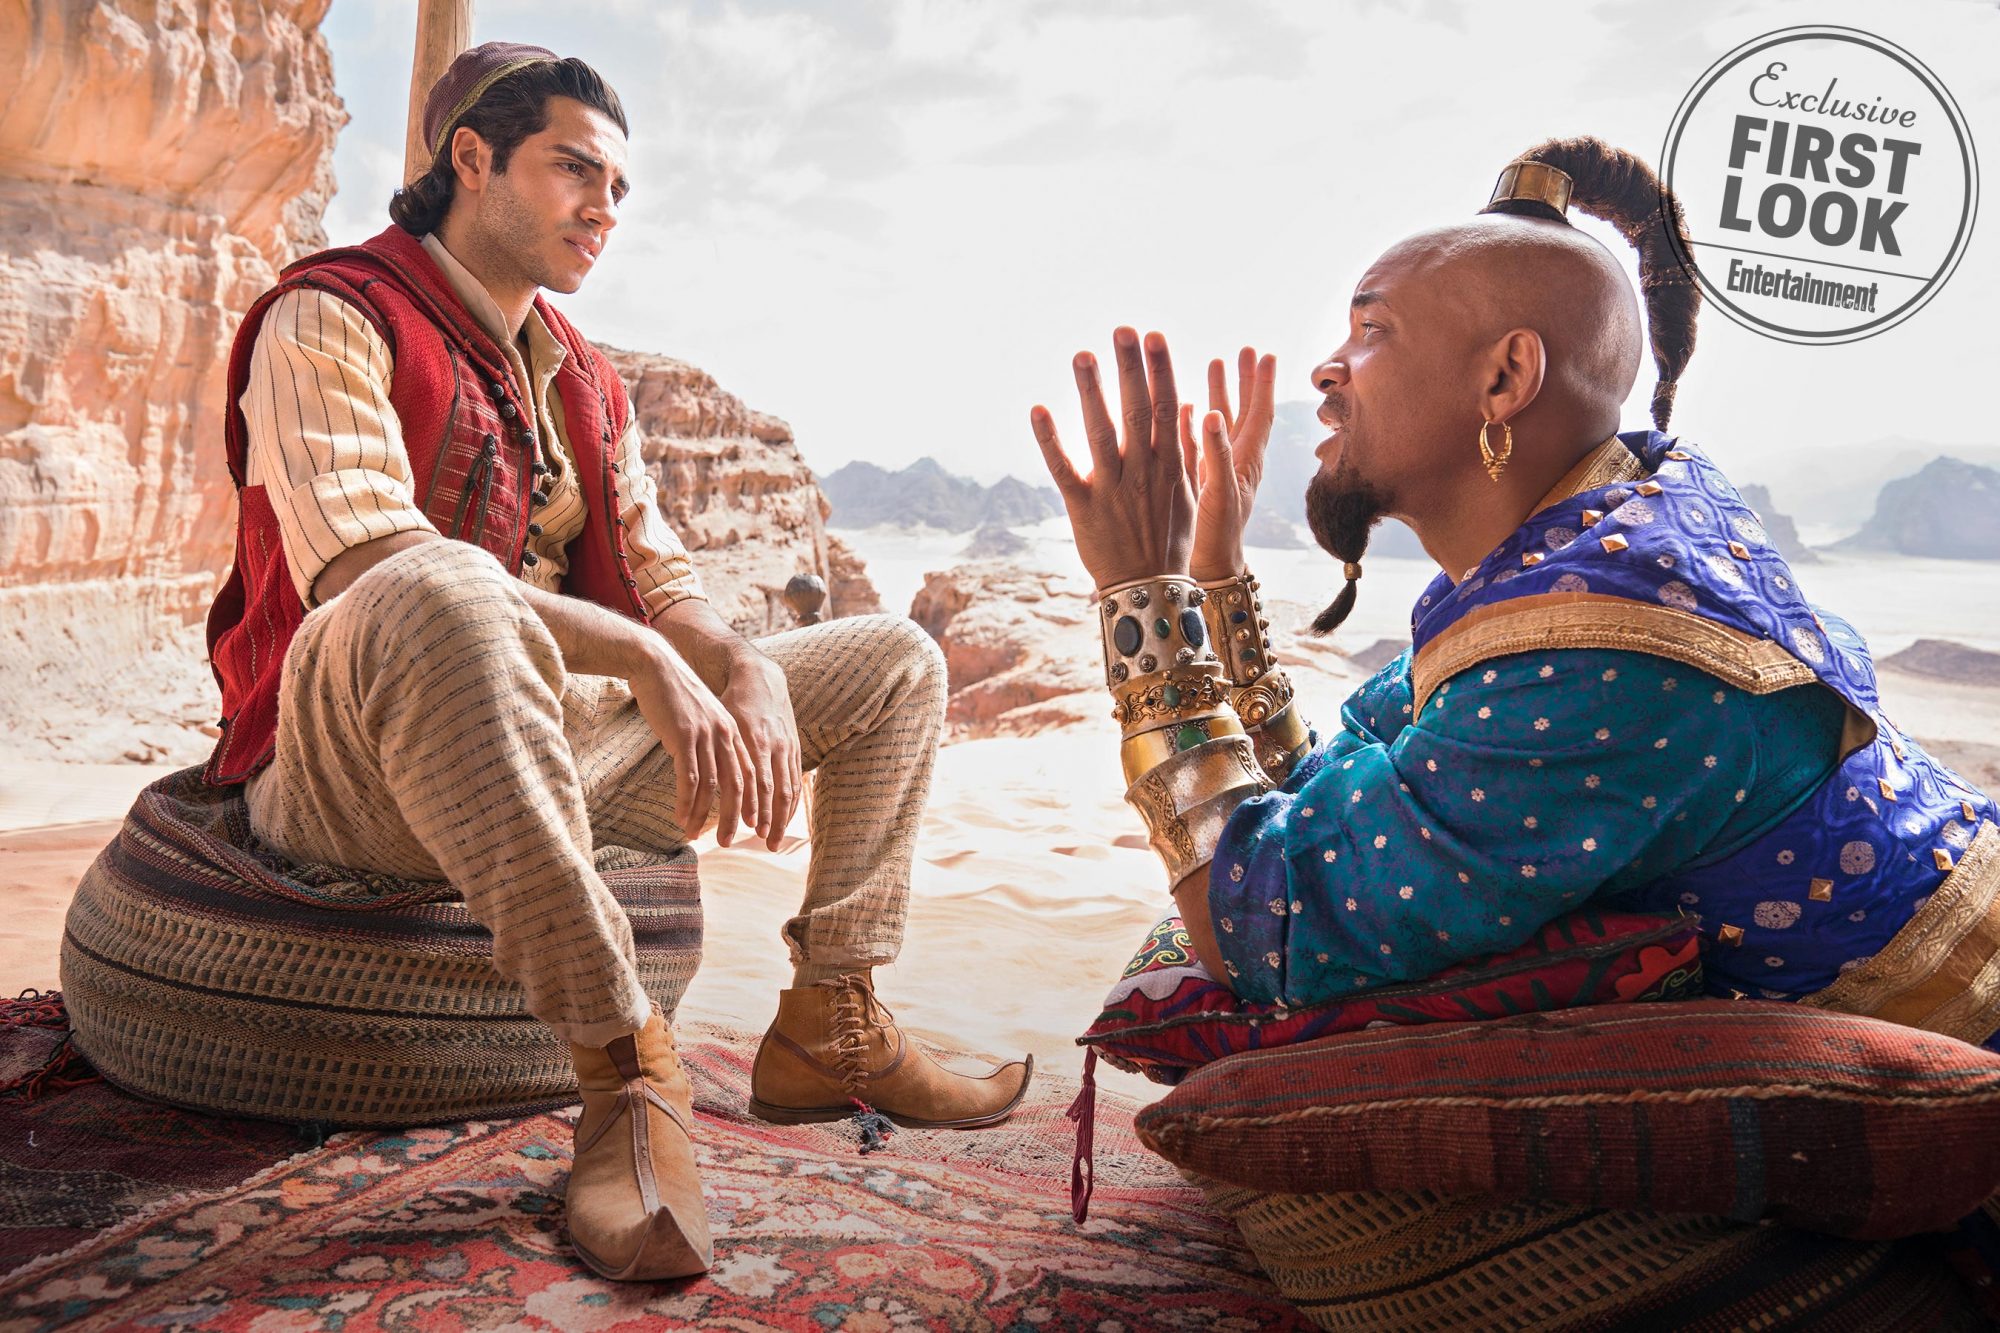 Will Smith As Genie In Aladdin Movie Wallpapers